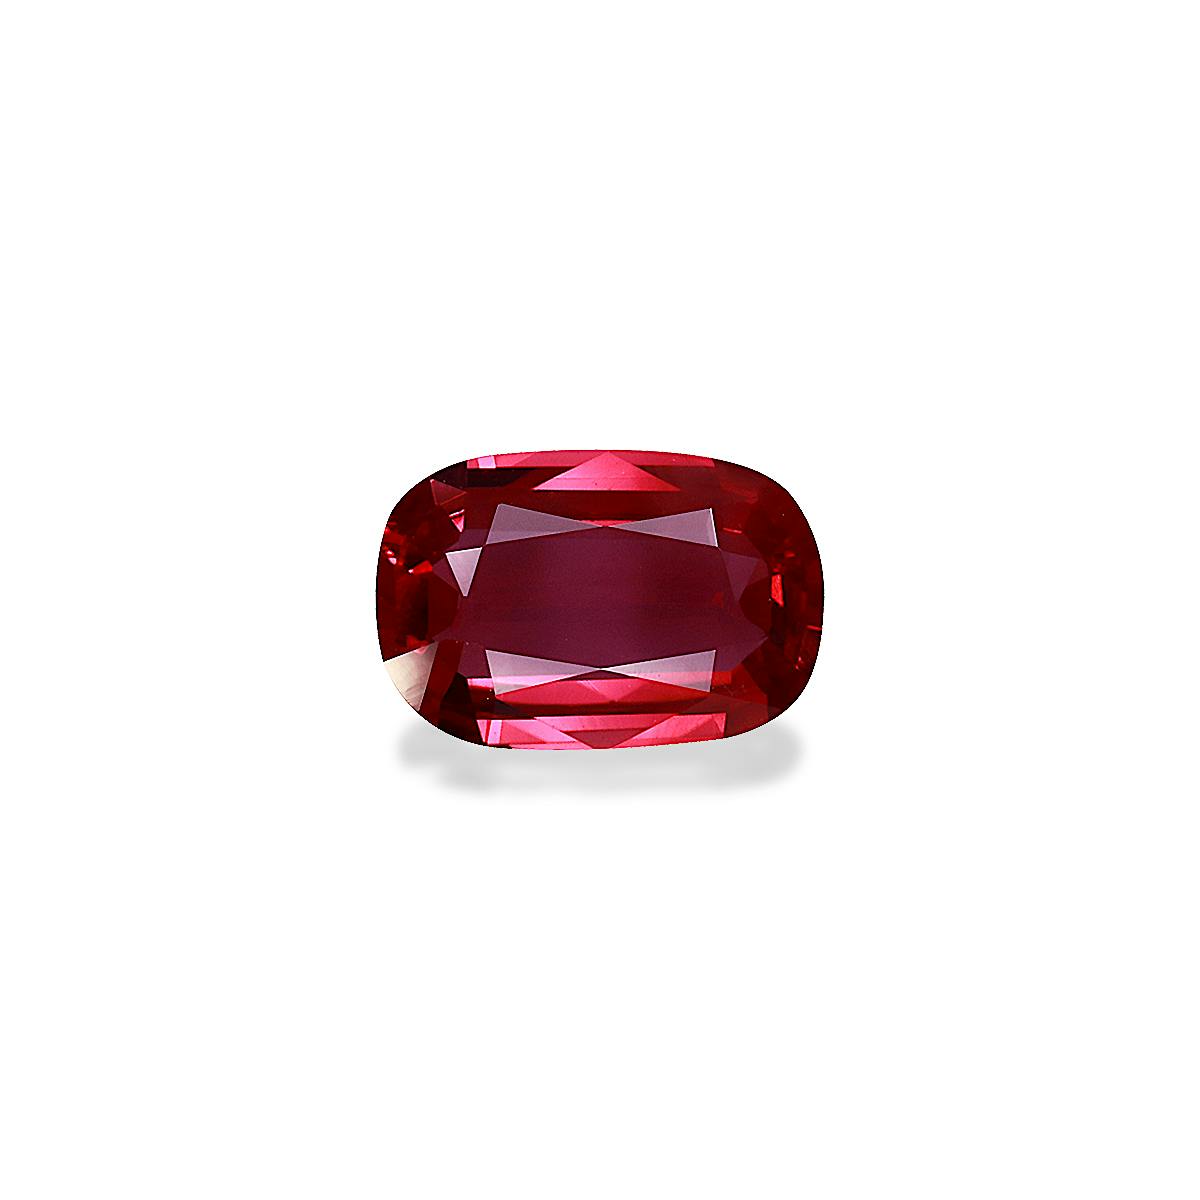 Mozambique Ruby 1.42ct - Main Image